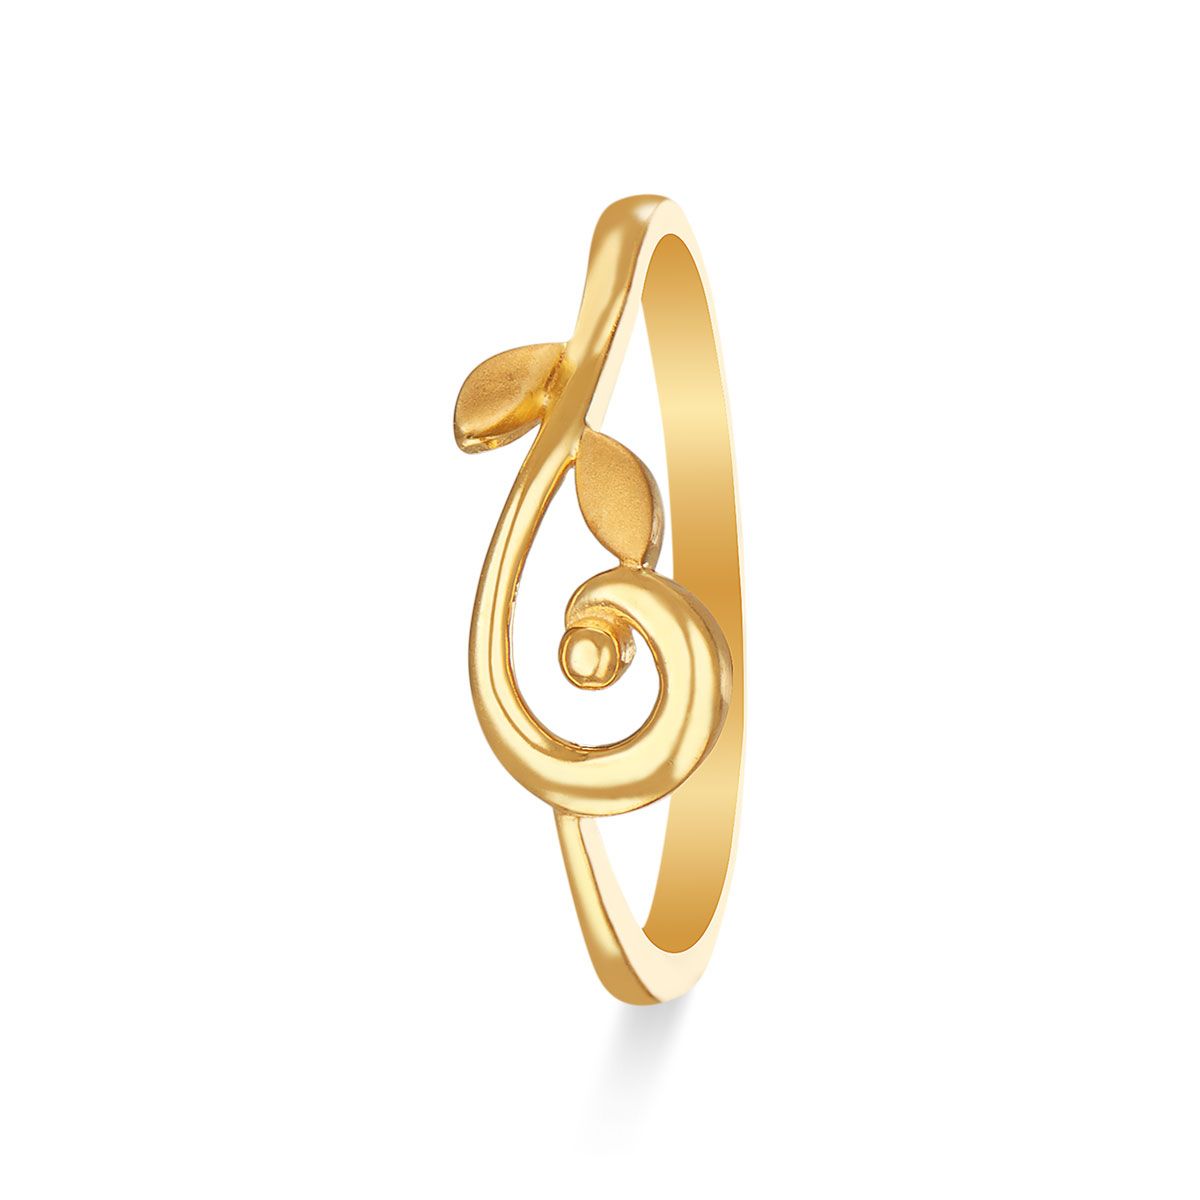 Simple Daily Wear Gold Ring Designs - JD SOLITAIRE